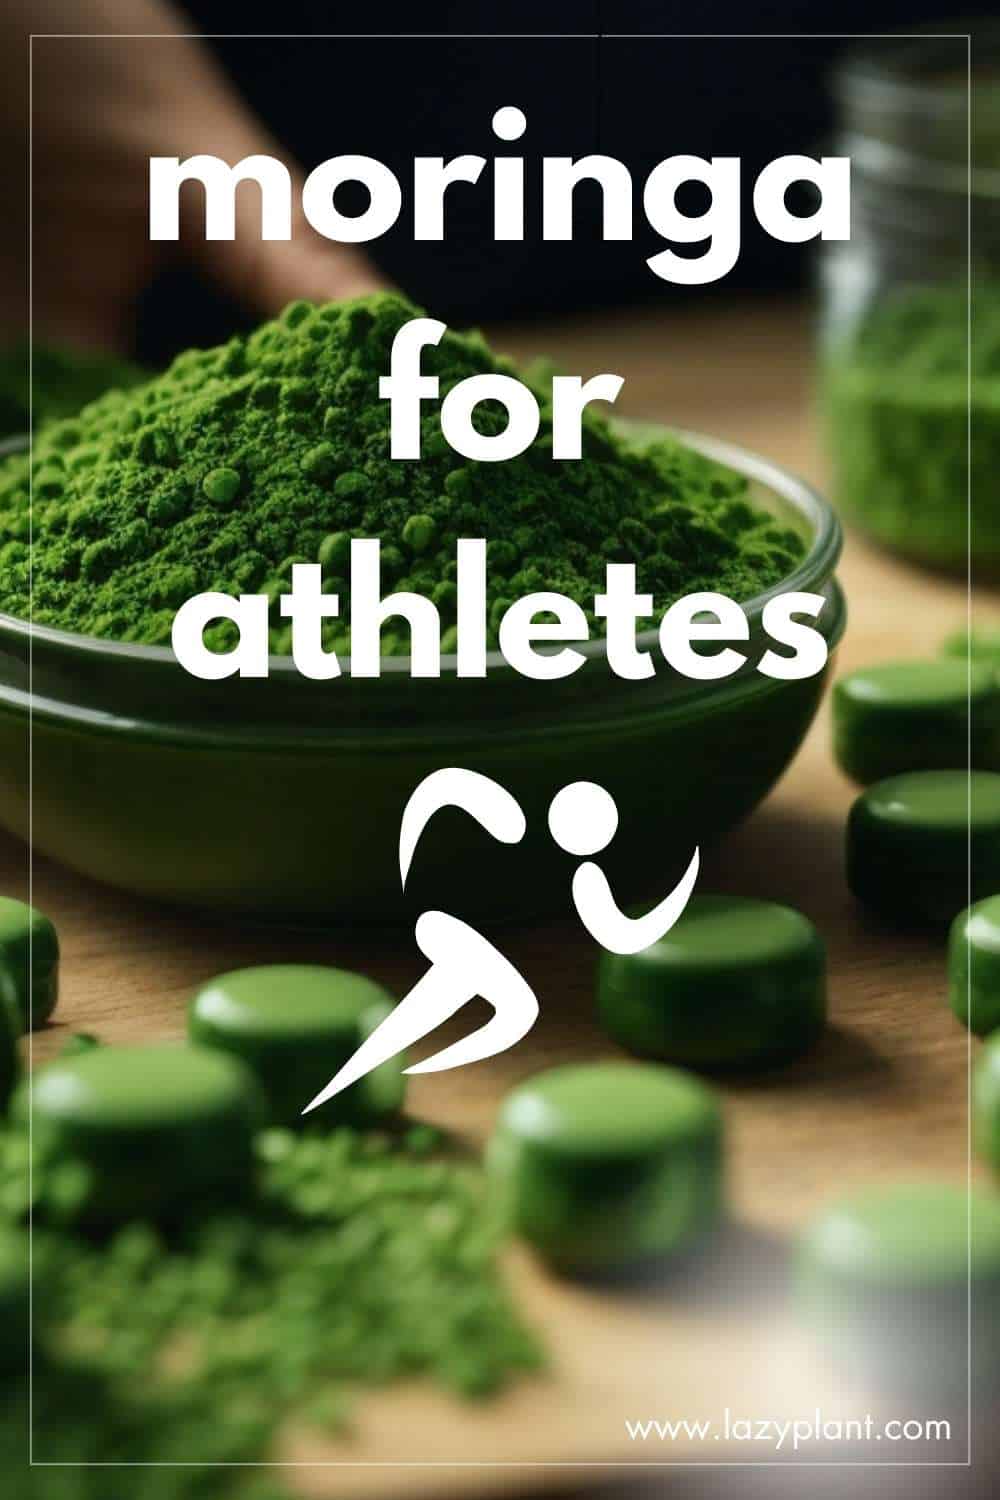 Moringa: the best herb supplement for athletes.